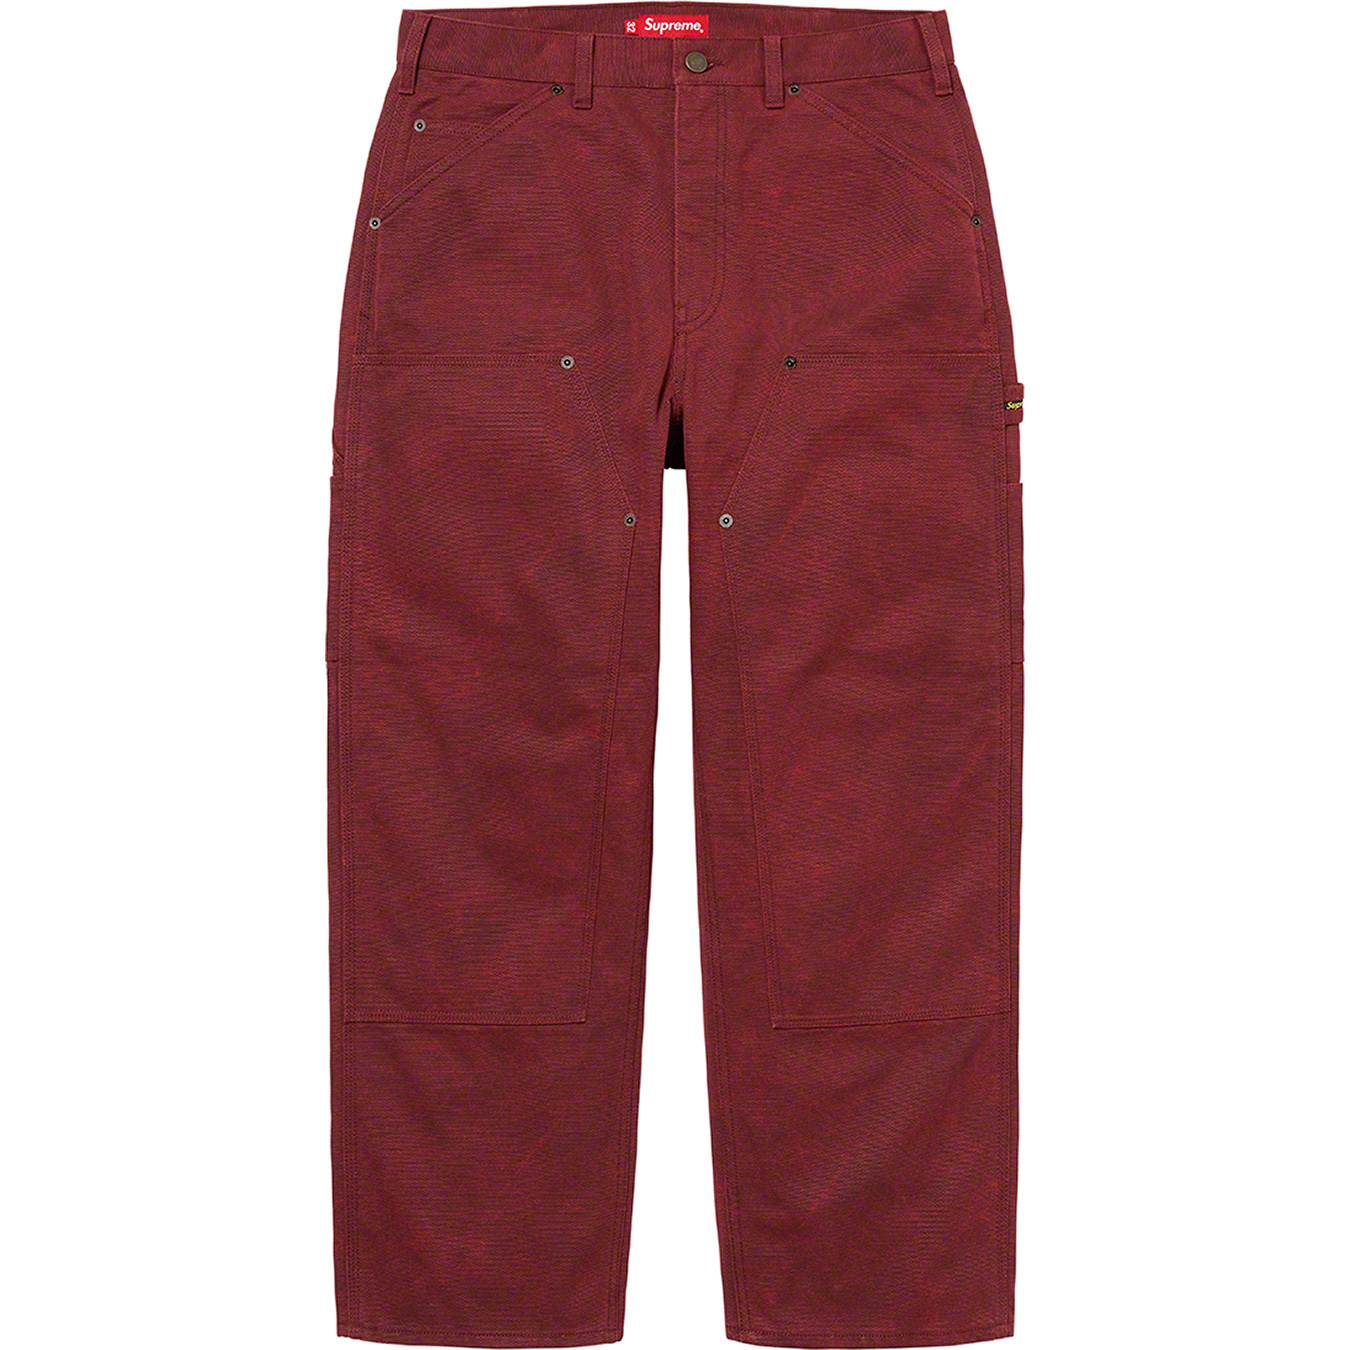 Canvas Double Knee Painter Pant - fall winter 2021 - Supreme